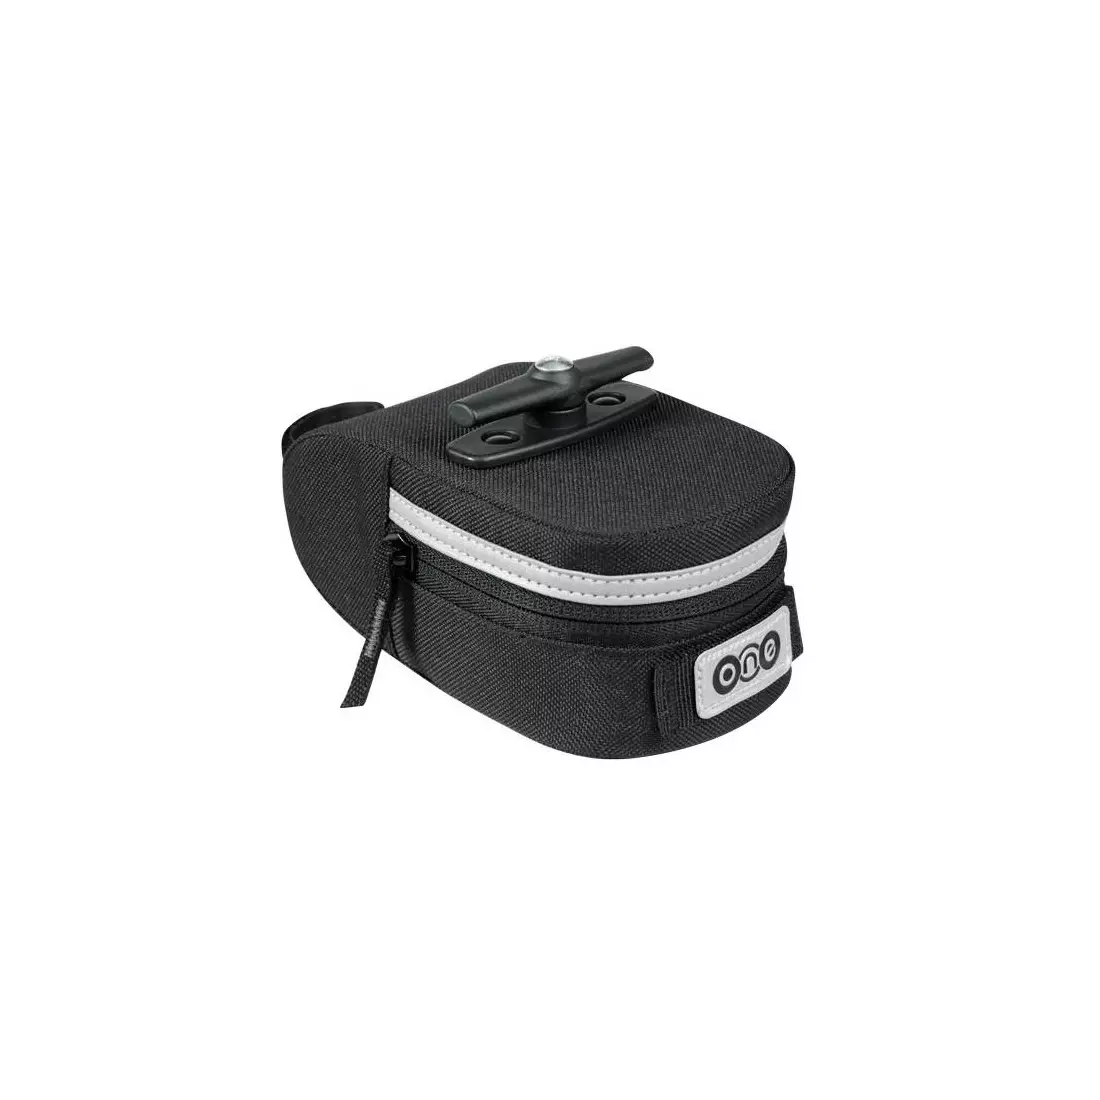 JUST ONE DRIVEN 3.0 S saddle bag capacity 0.5 L 250410